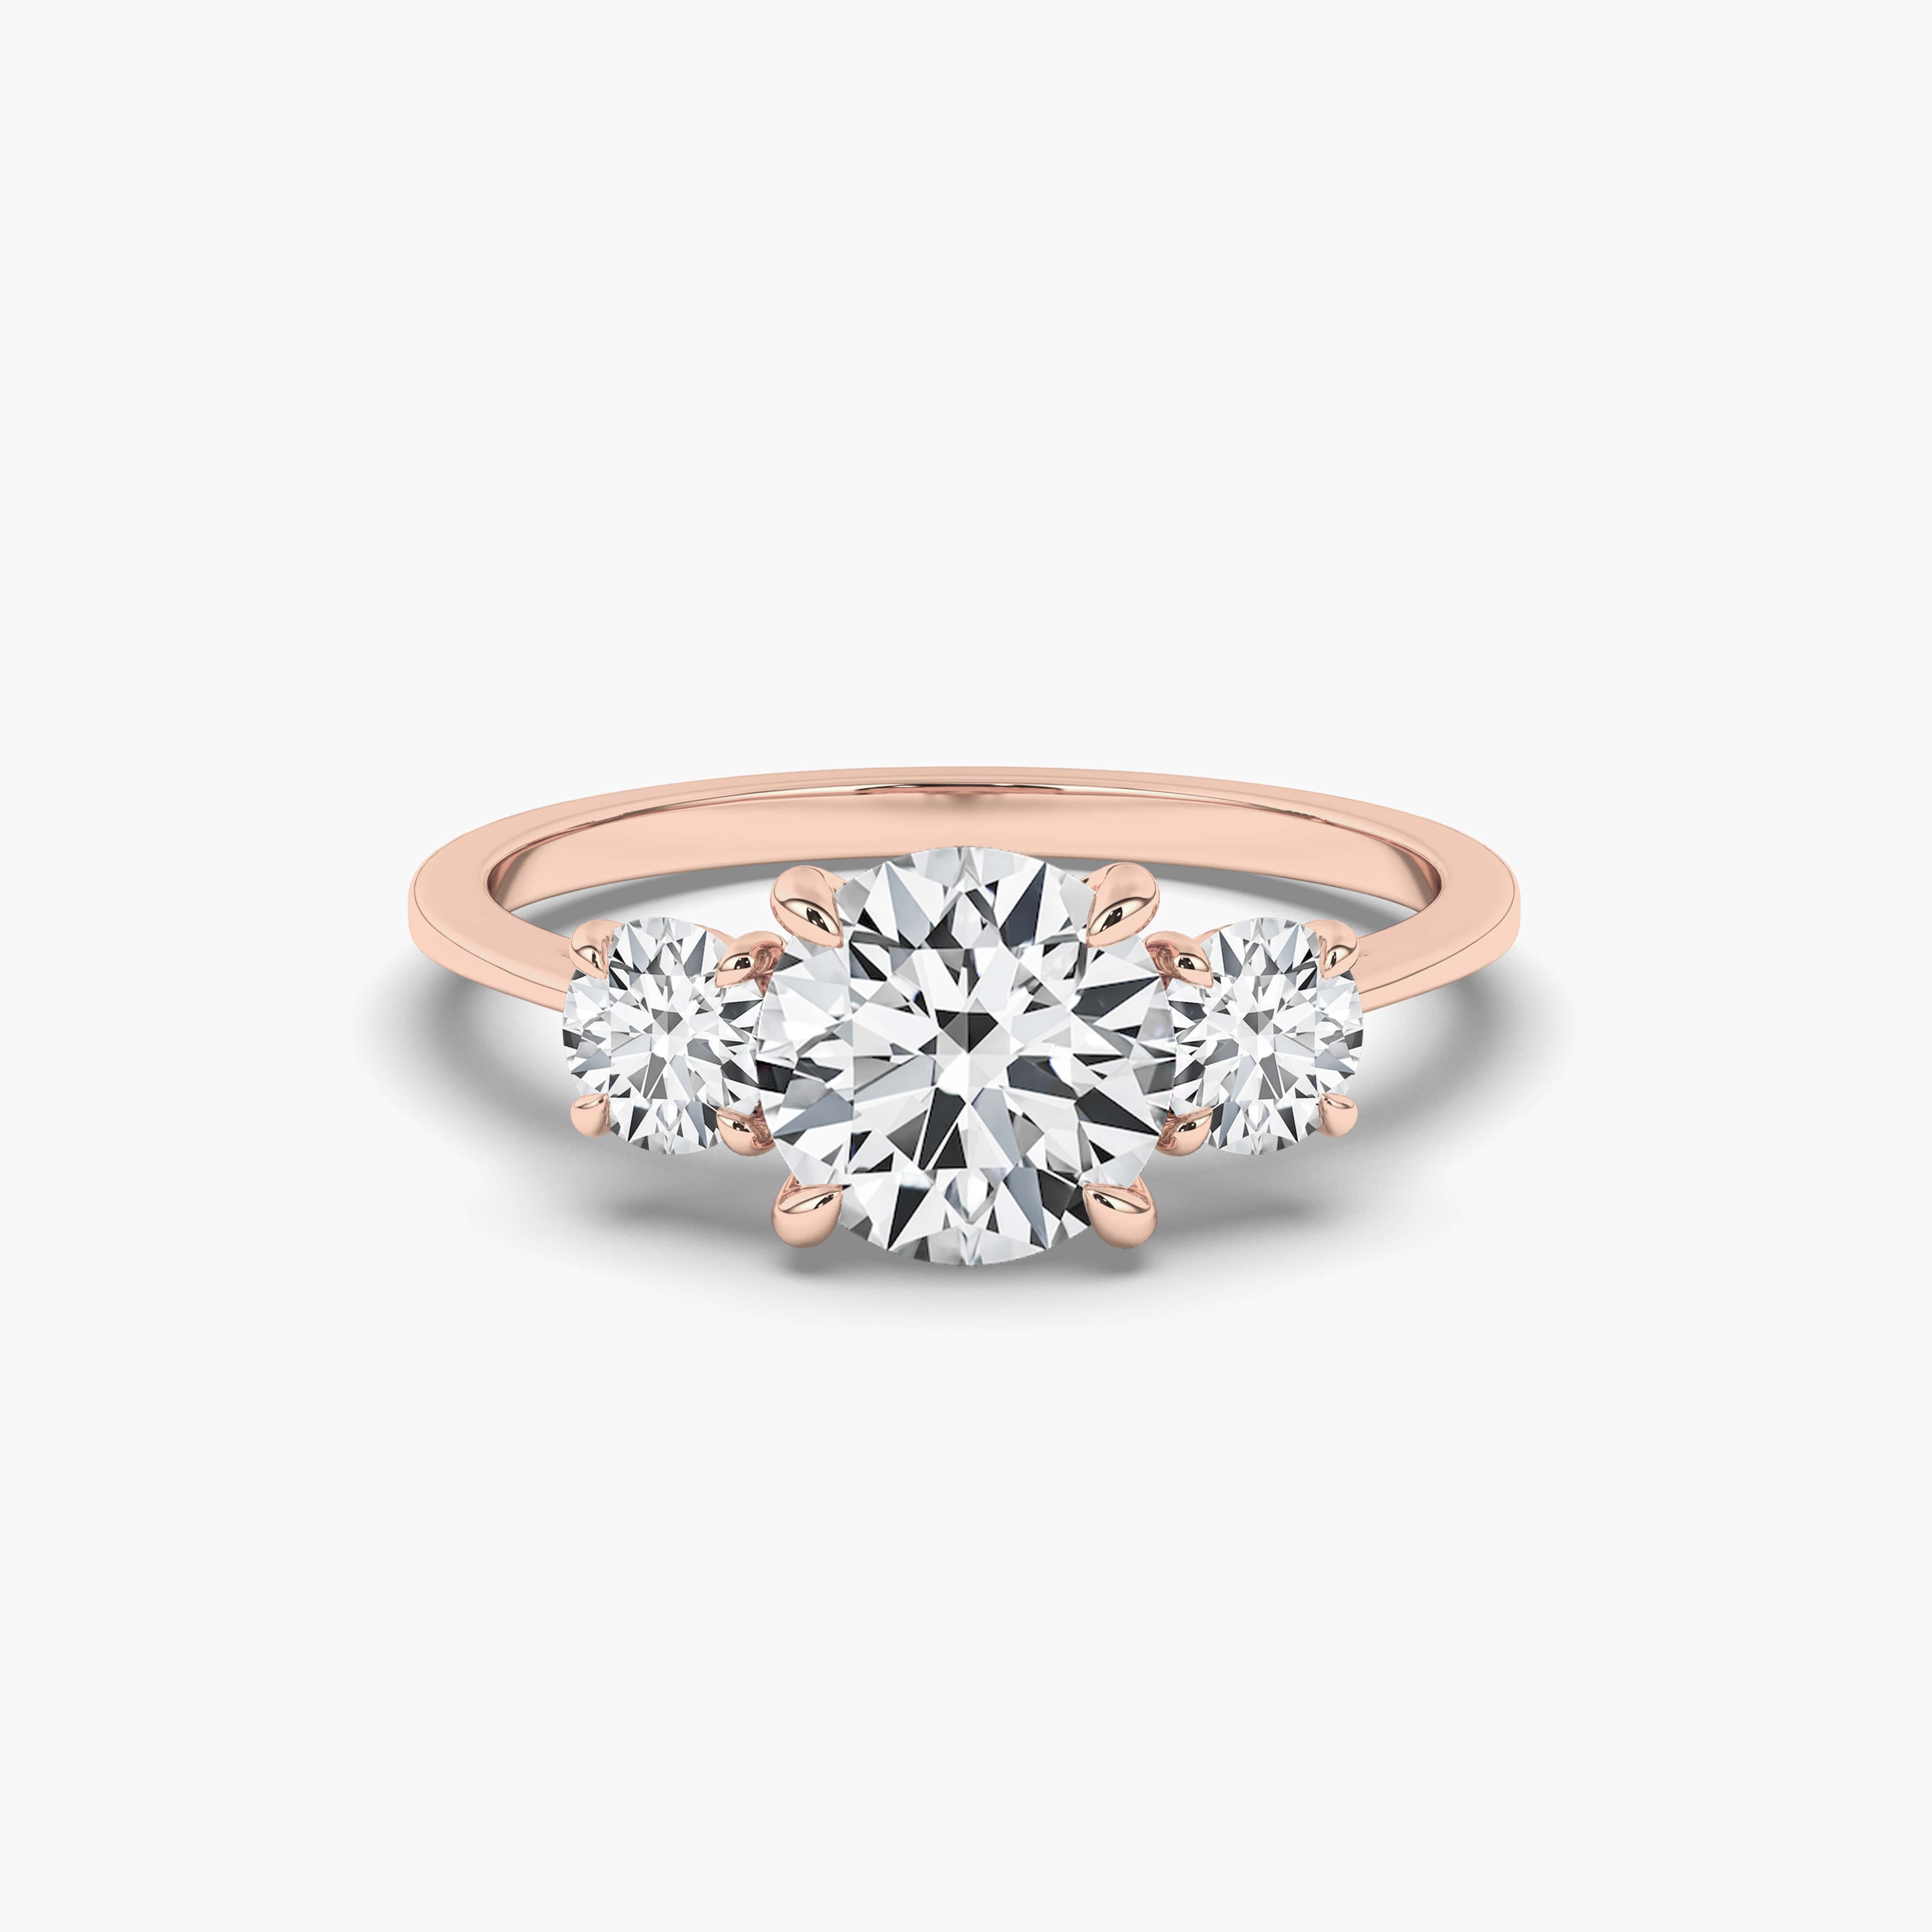 ROSE GOLD ROUND CUT DIAMOND ENGAGEMENT RING WITH SIDE DIAMONDS